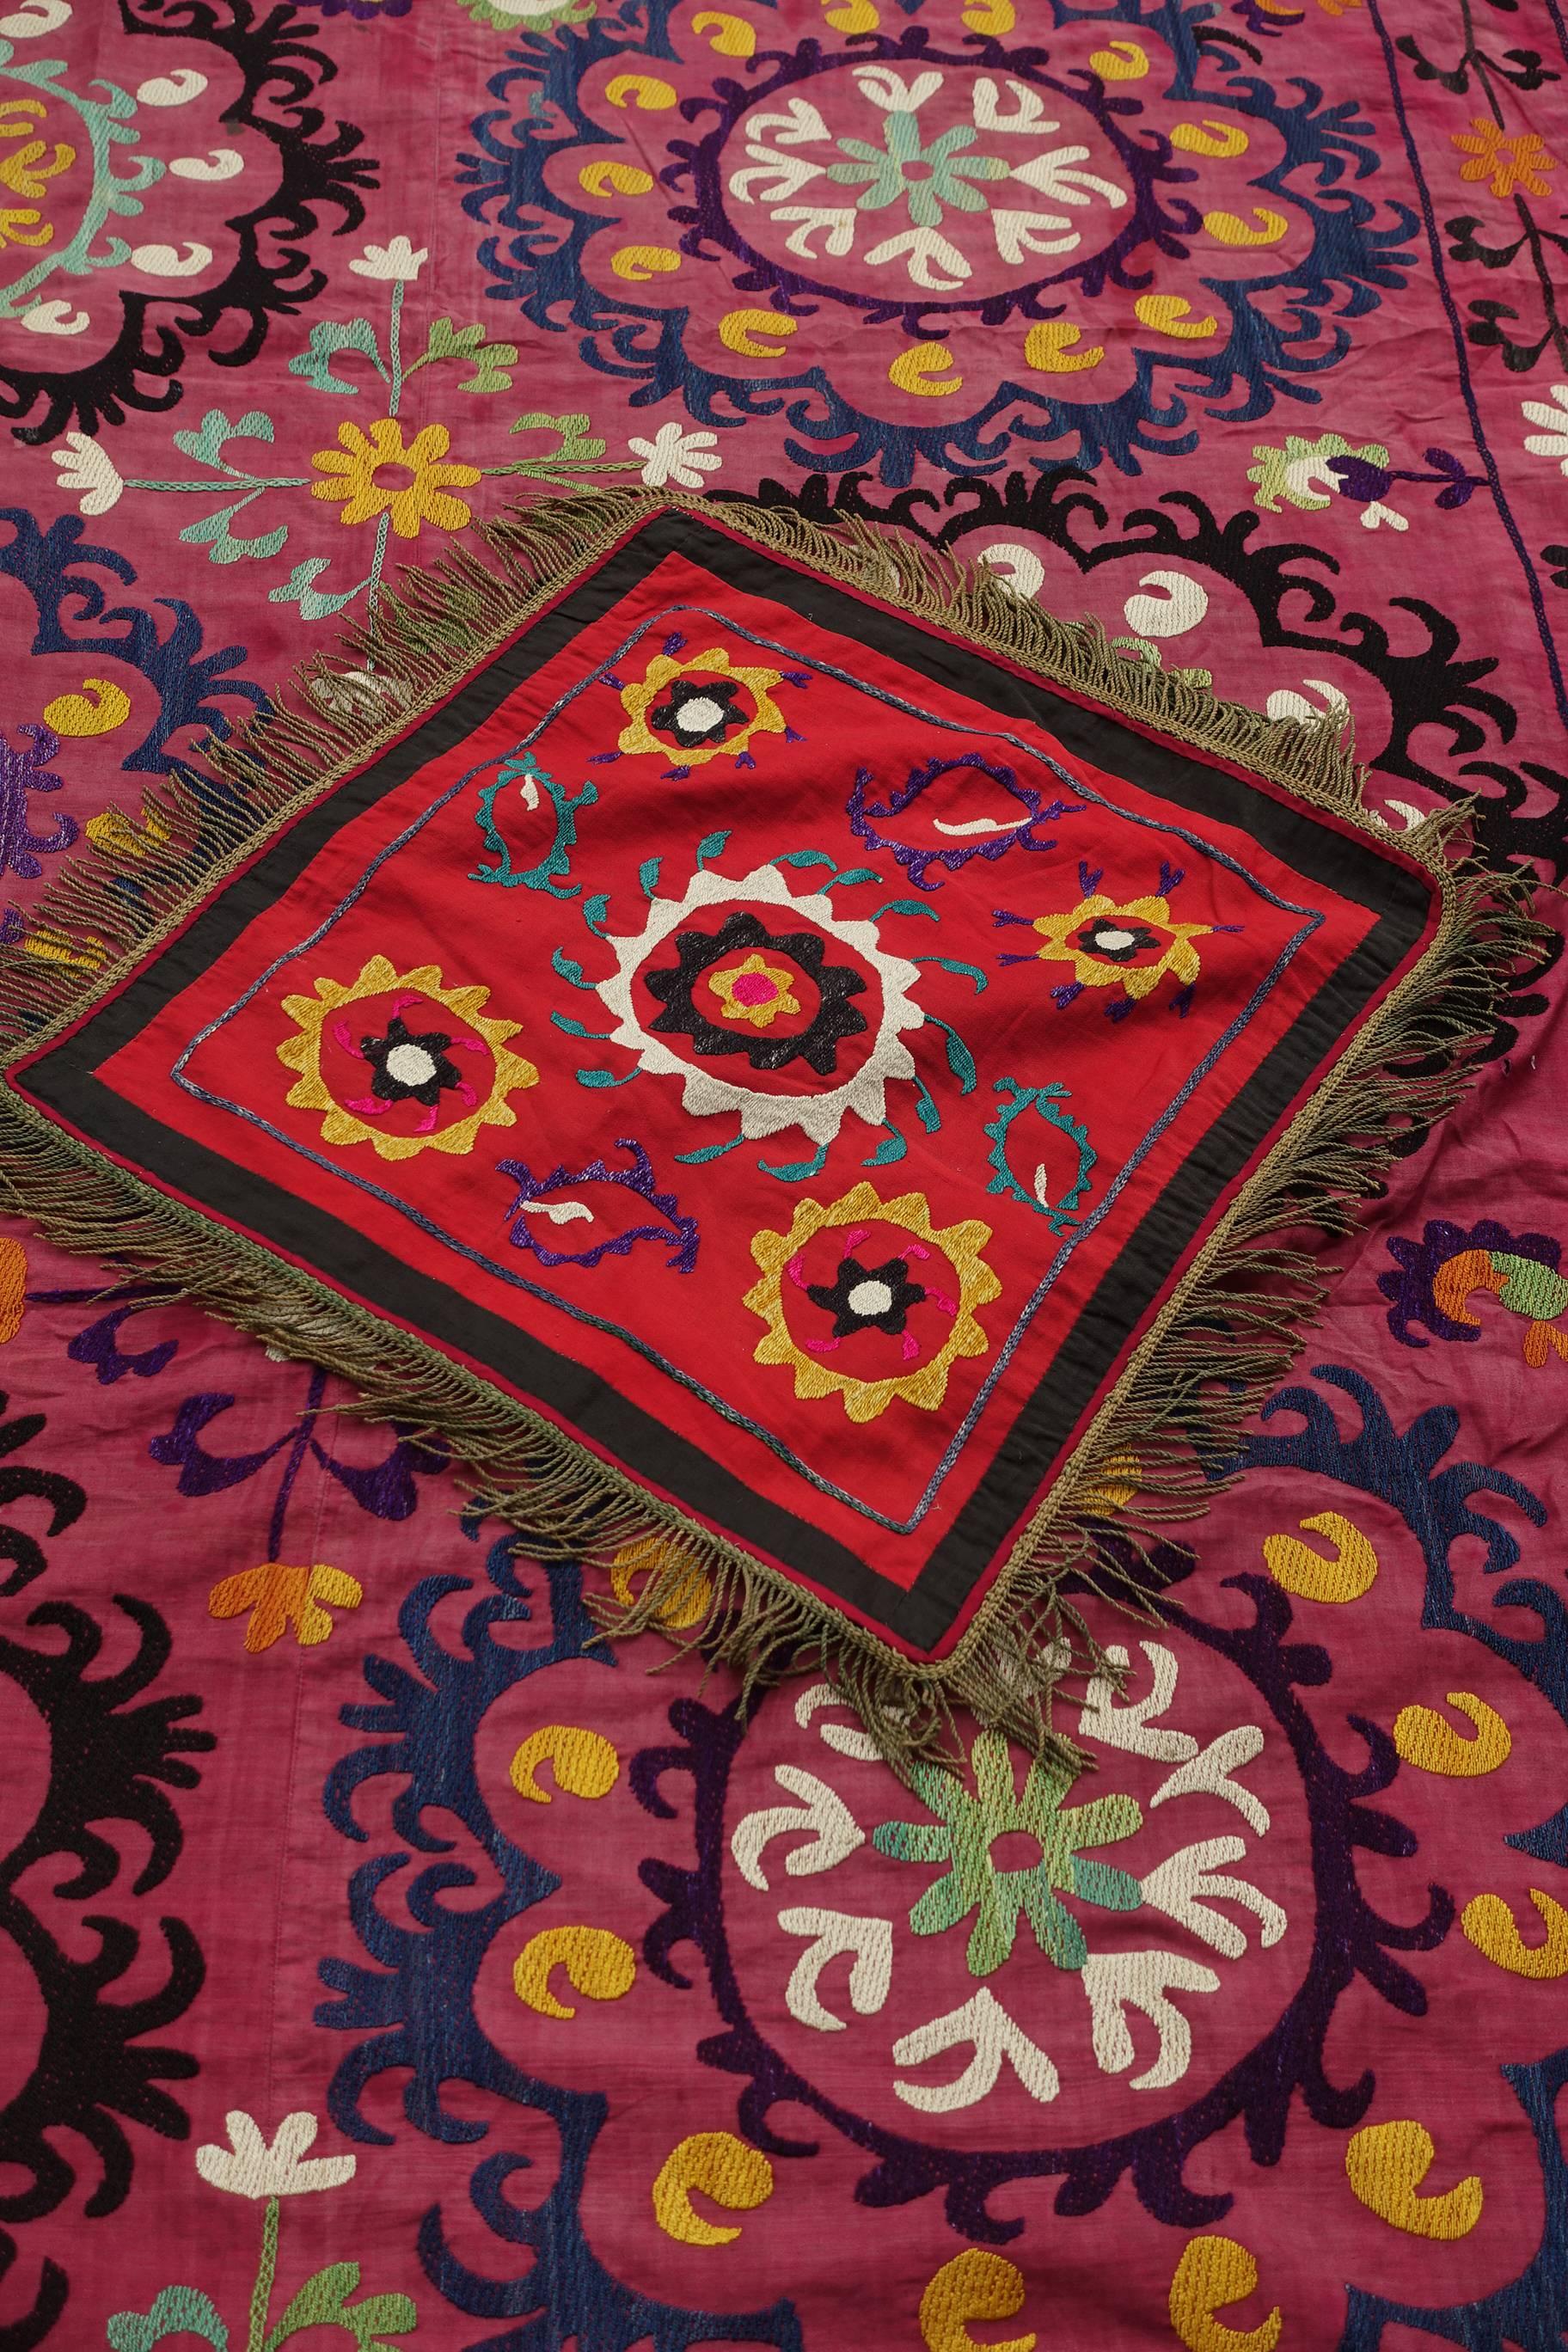 Sozni (or Suzani) embroidery is a style of embroidery from Uzbekistan. 
This is a beautiful dowry sozni (Suzani) which is traditionally offered as part of the bride's dowry offered to the broom's family. The pillow case is rare and a great addition